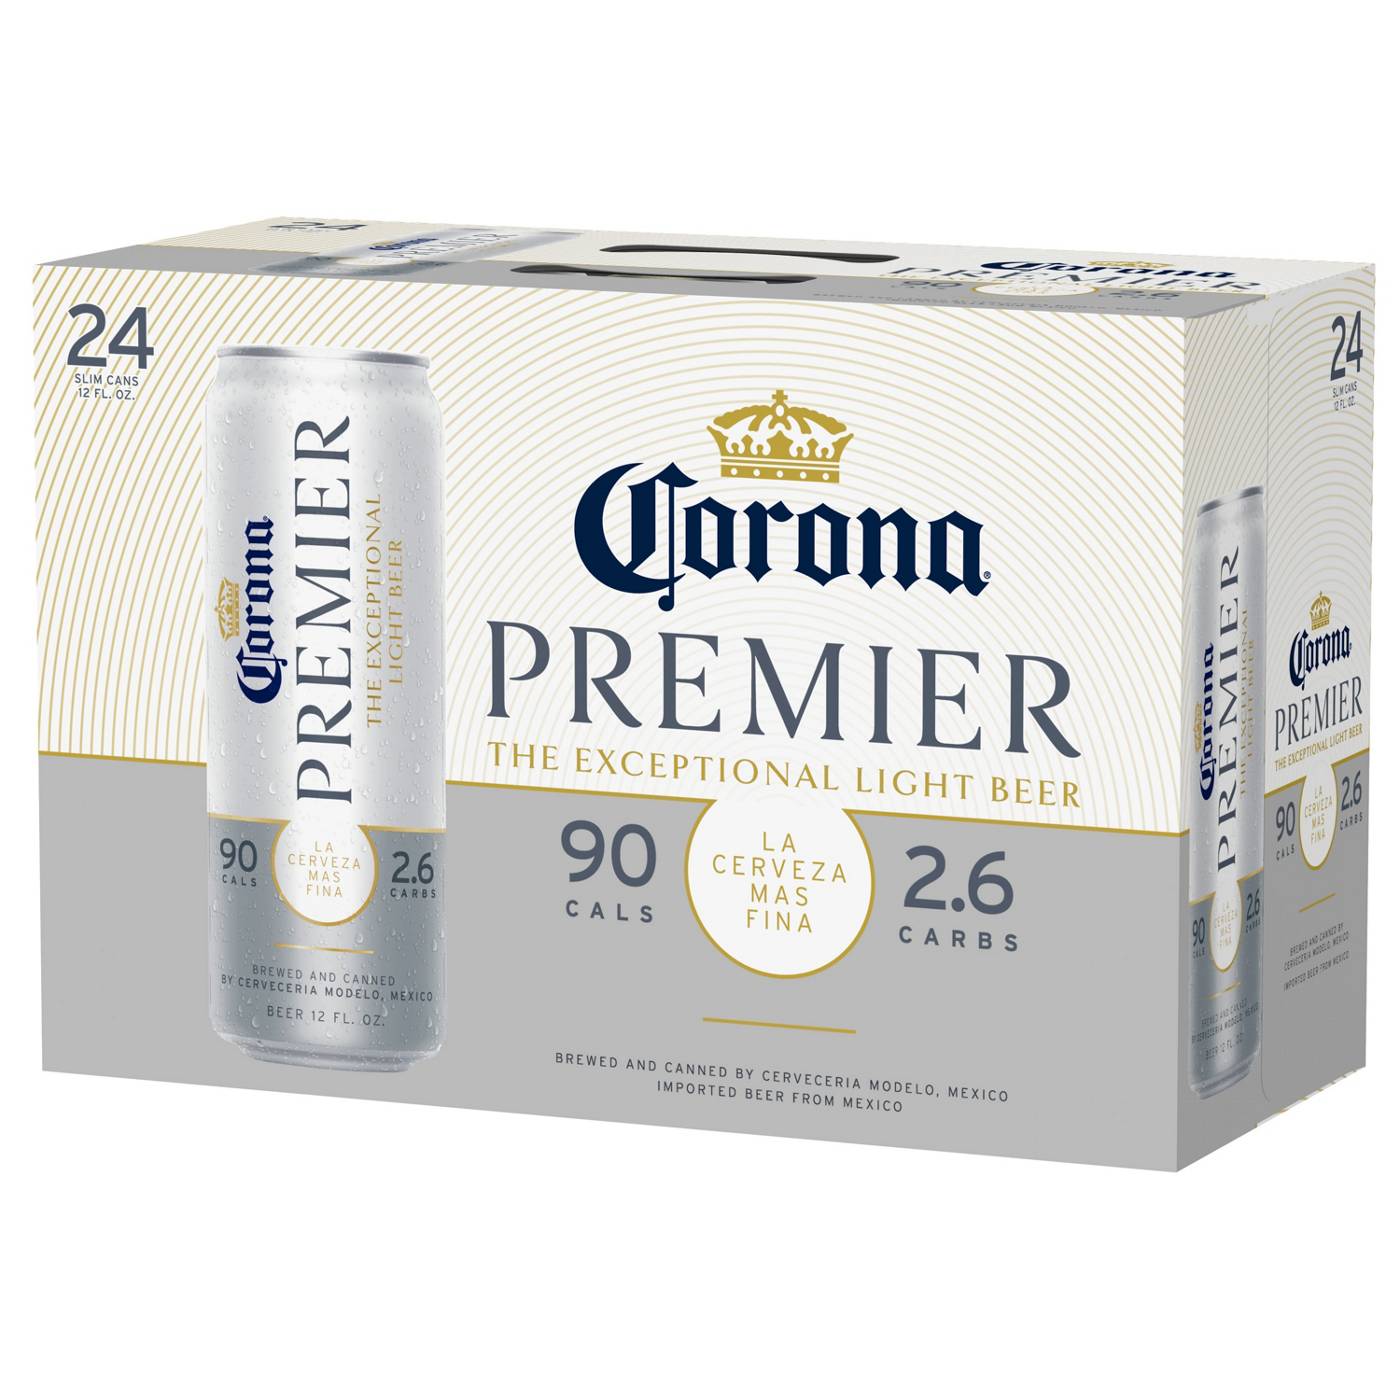 Corona Premier Mexican Lager Import Light Beer 12 oz Cans, 24 pk; image 4 of 10